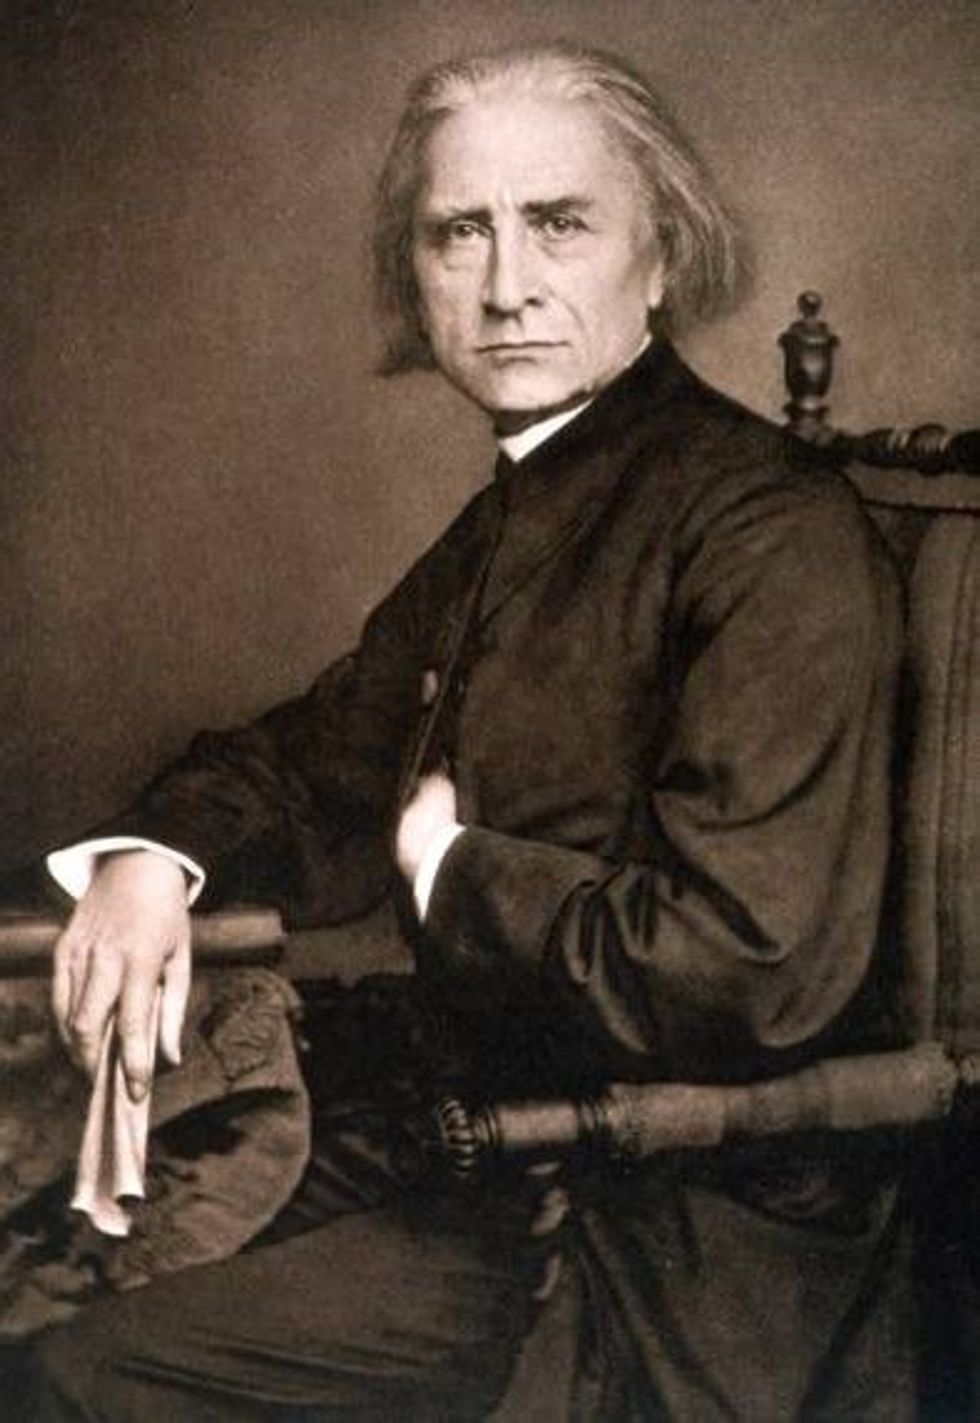 Read Franz Liszt's facts to know more about music education and court concerts.